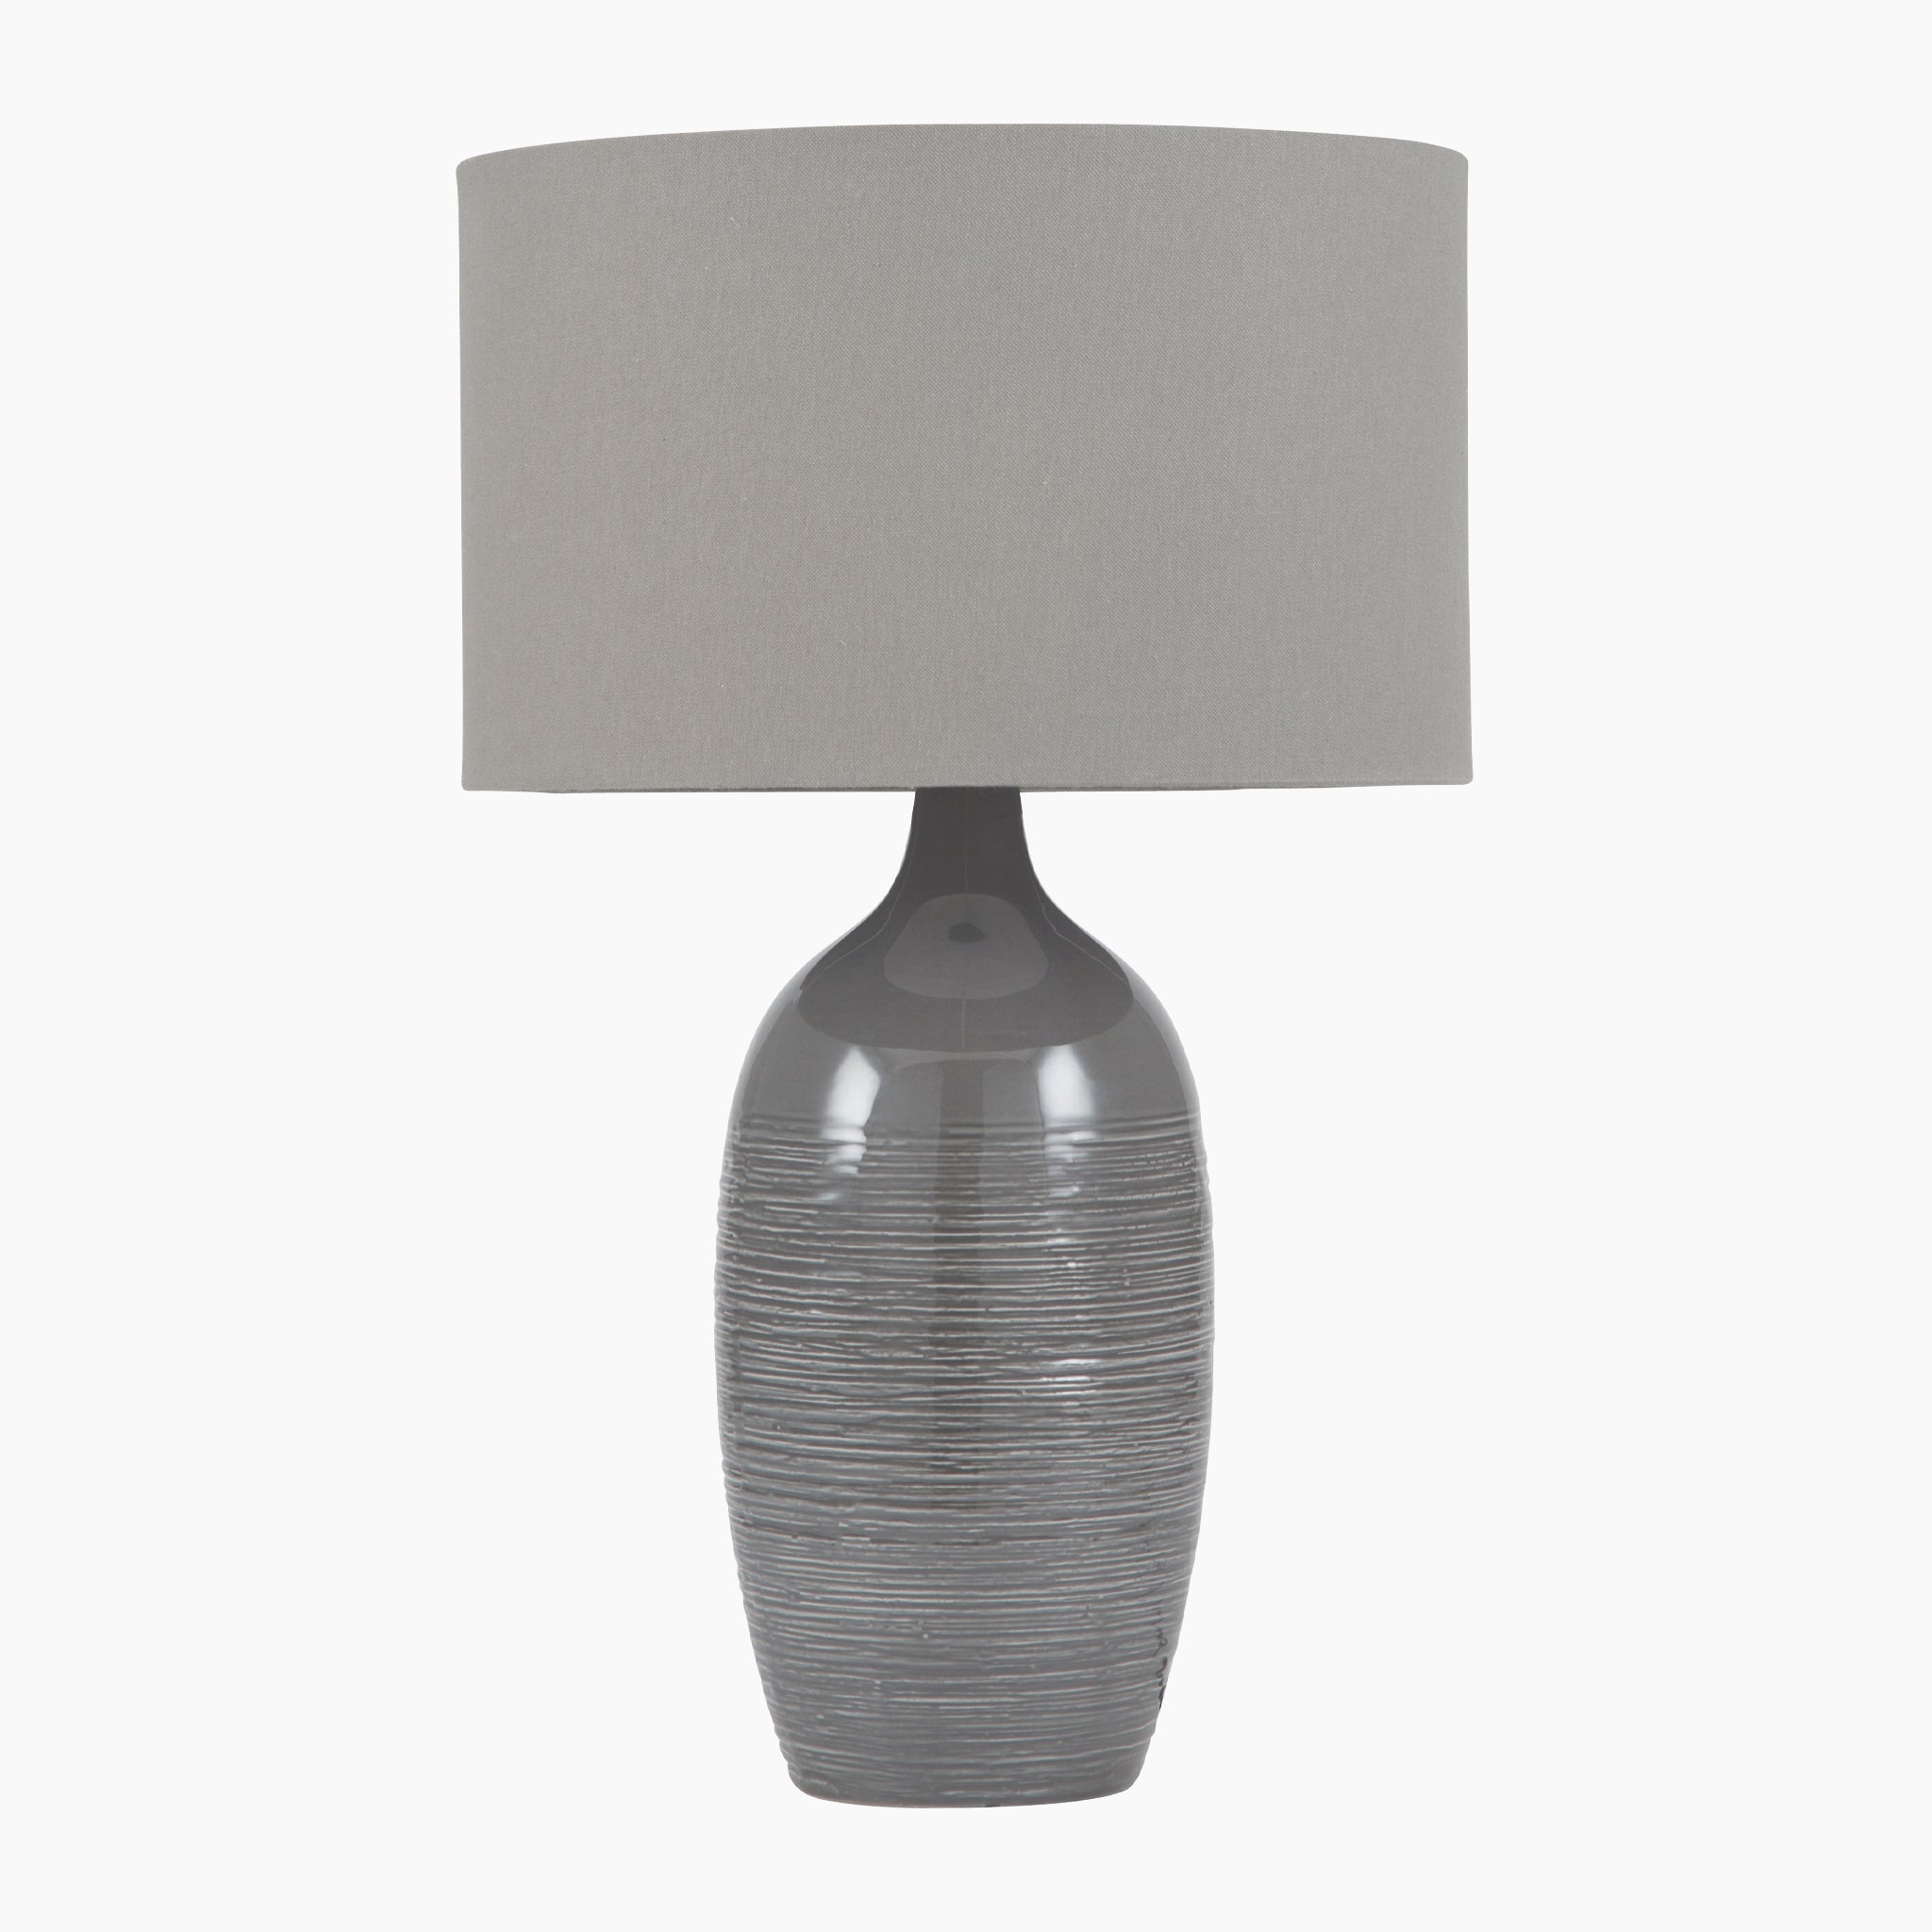 Abbie Etched Graphite Ceramic Table Lamp in Grey - Harbour lifestyle